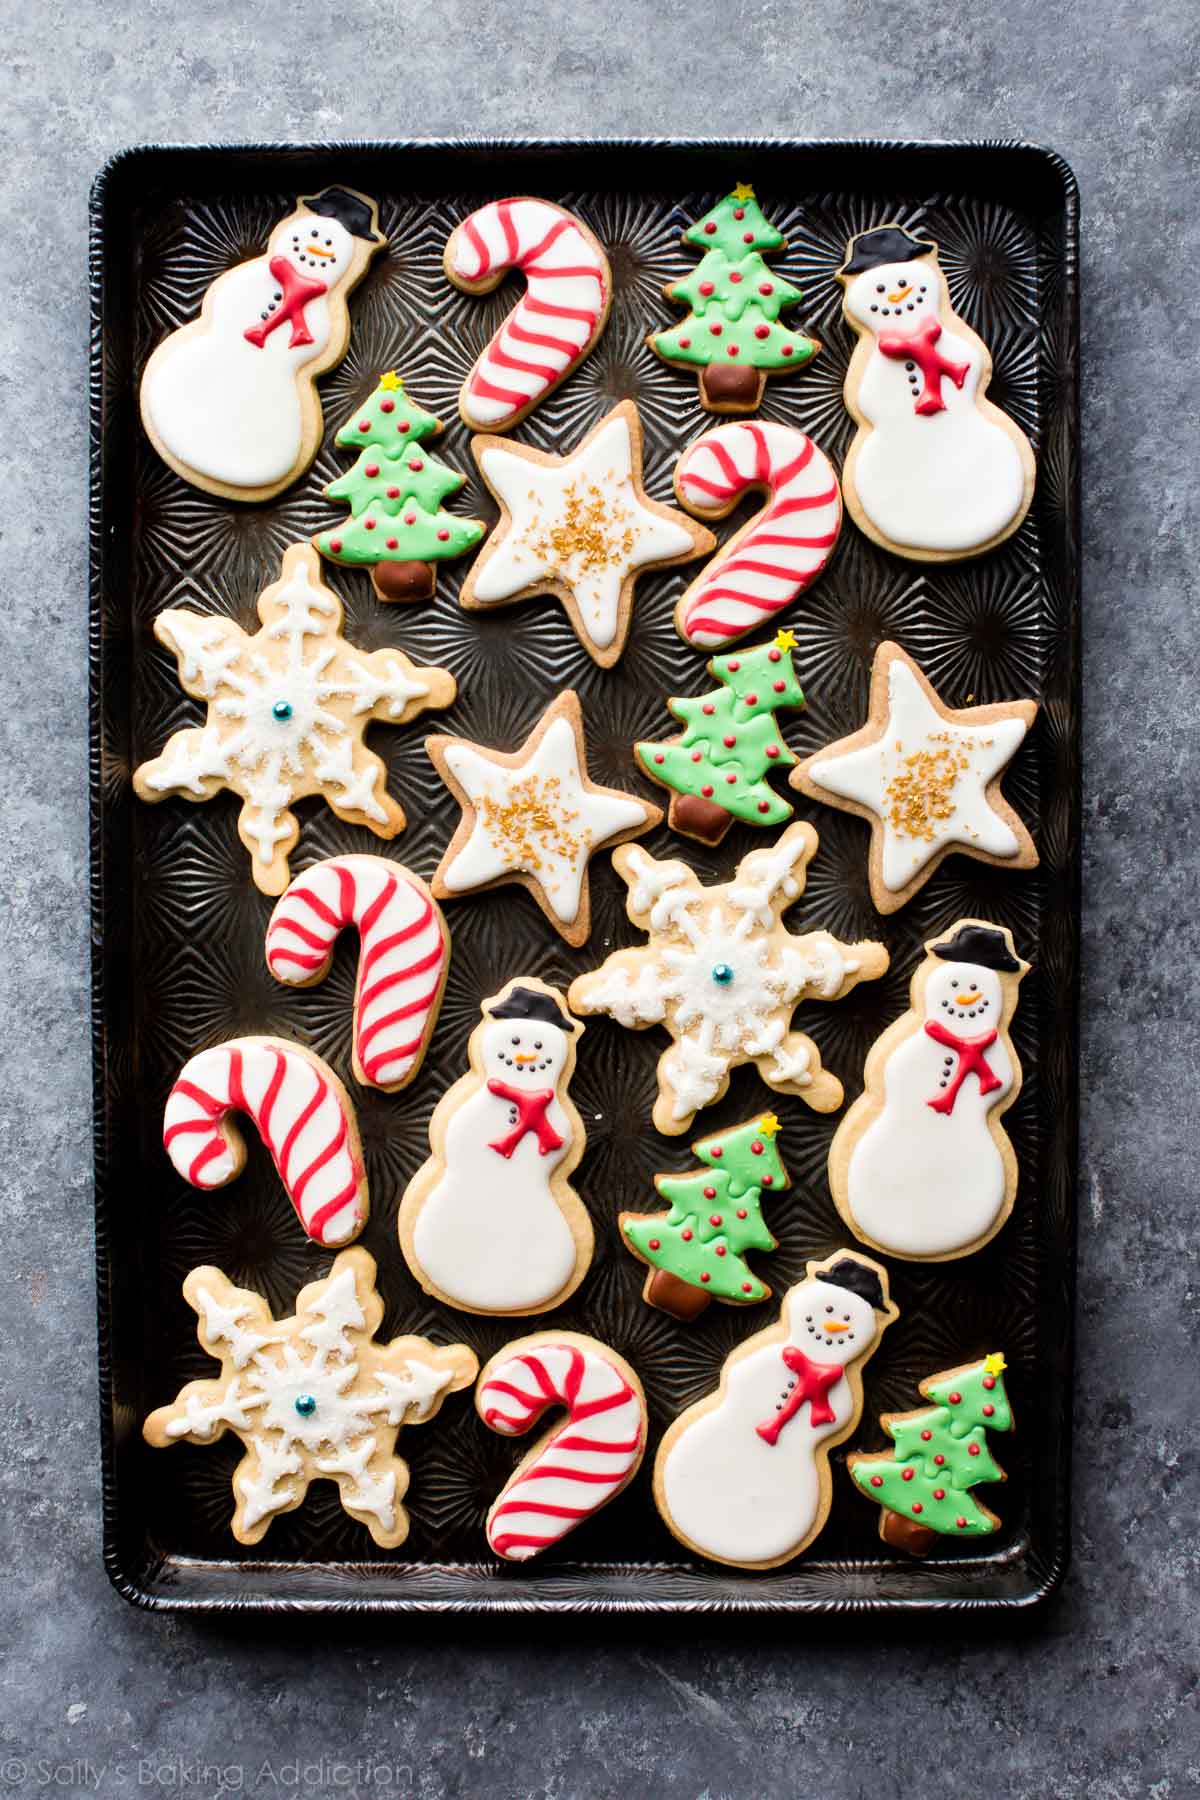 how to decorate sugar cookies | sally's baking addiction